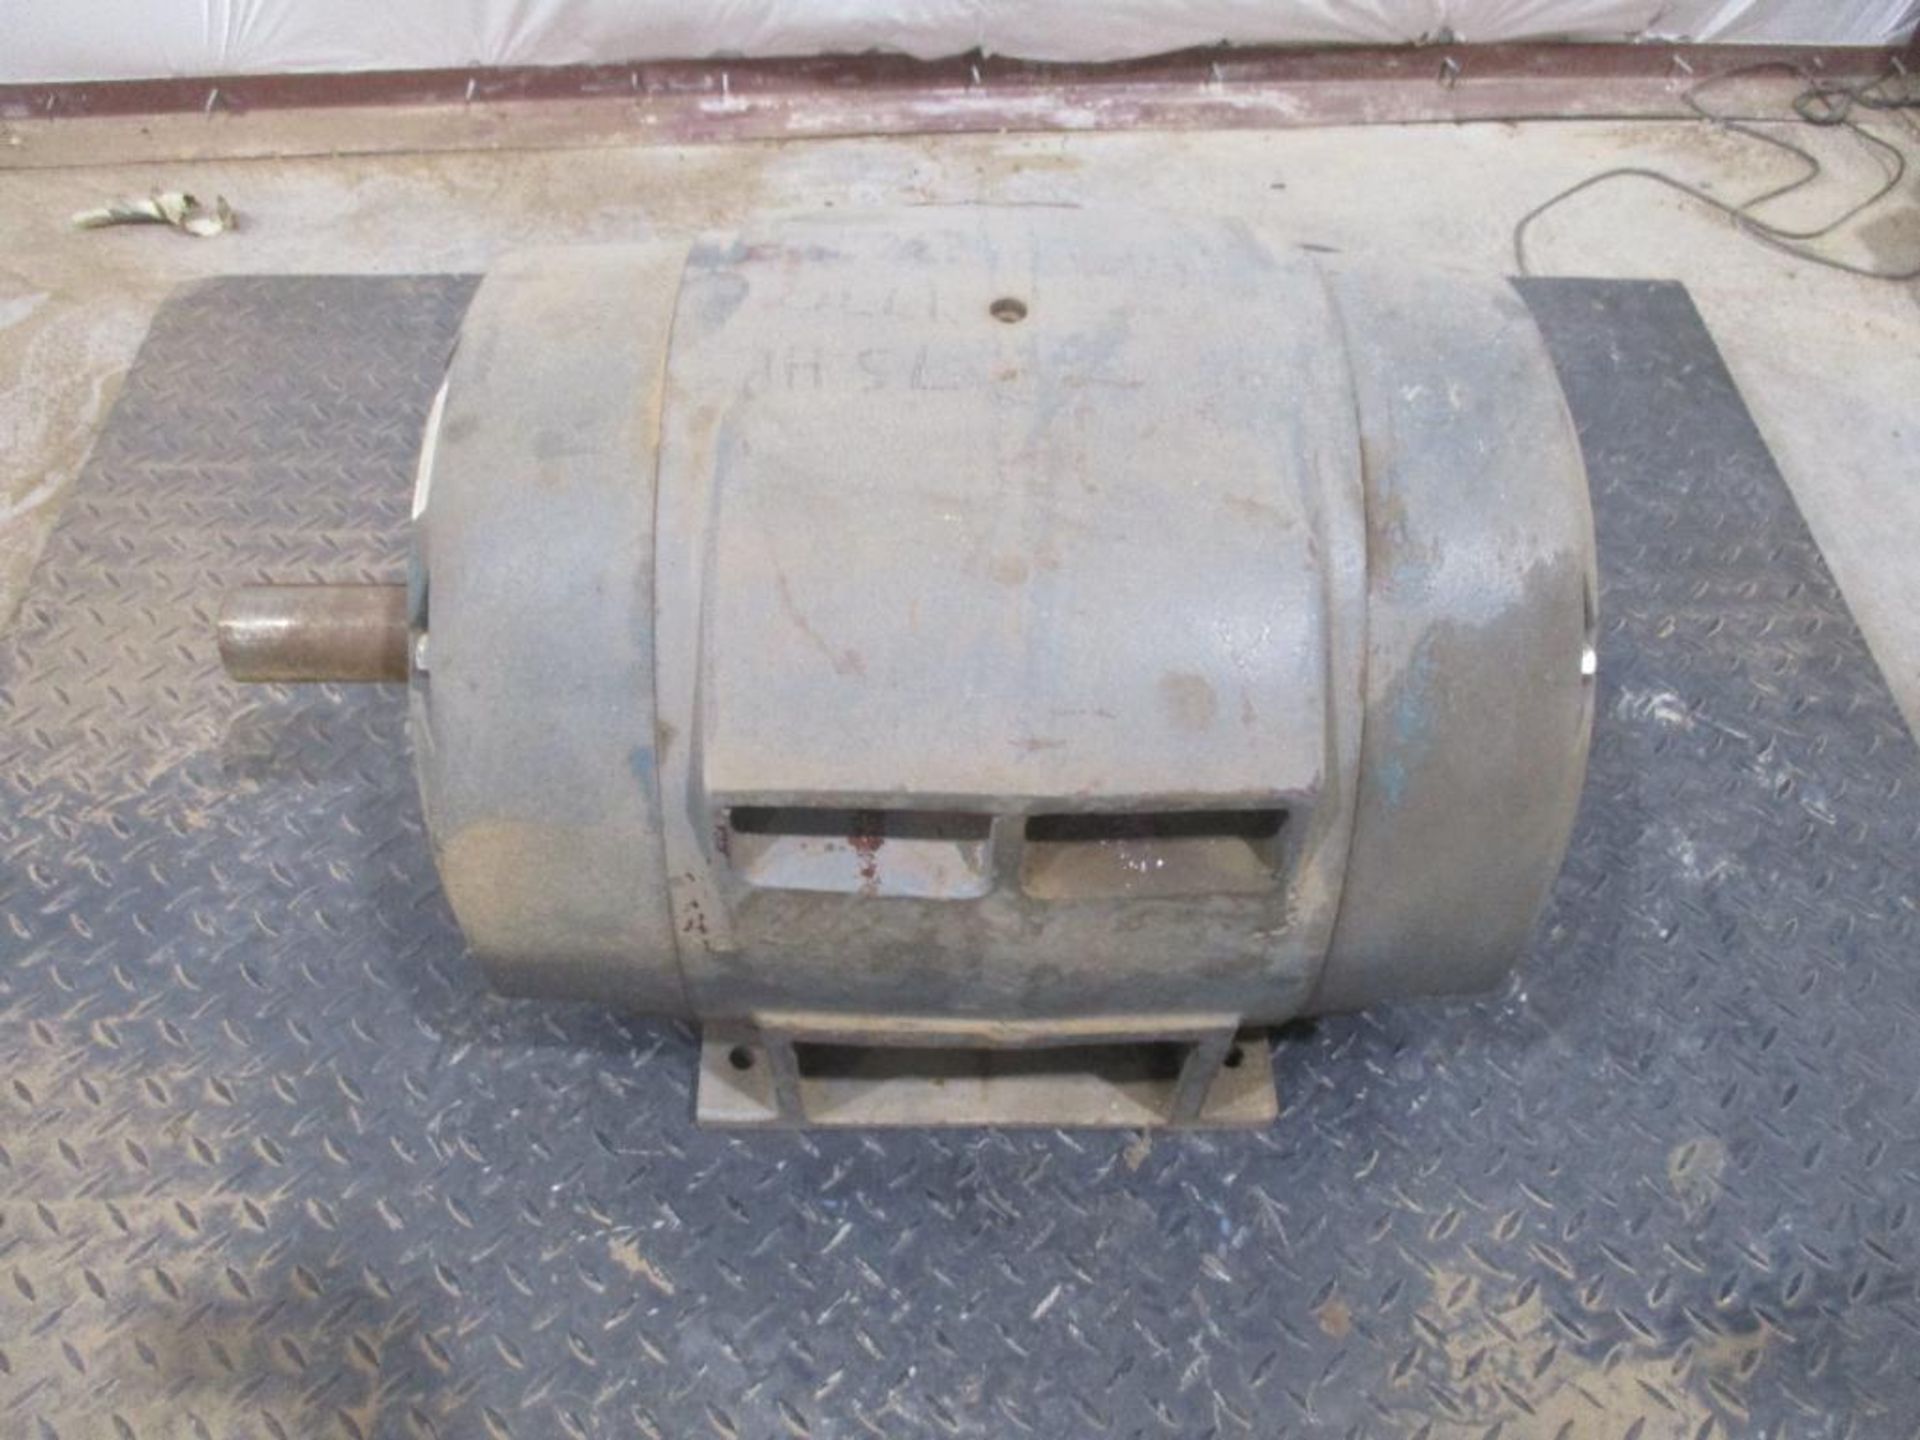 RELIANCE ELECTRIC 3 PHASE 75HP 1770RPM 365T FRAME A/C MOTOR P/N P36G22A-G2-0C, 582# lbs (There will - Image 3 of 5